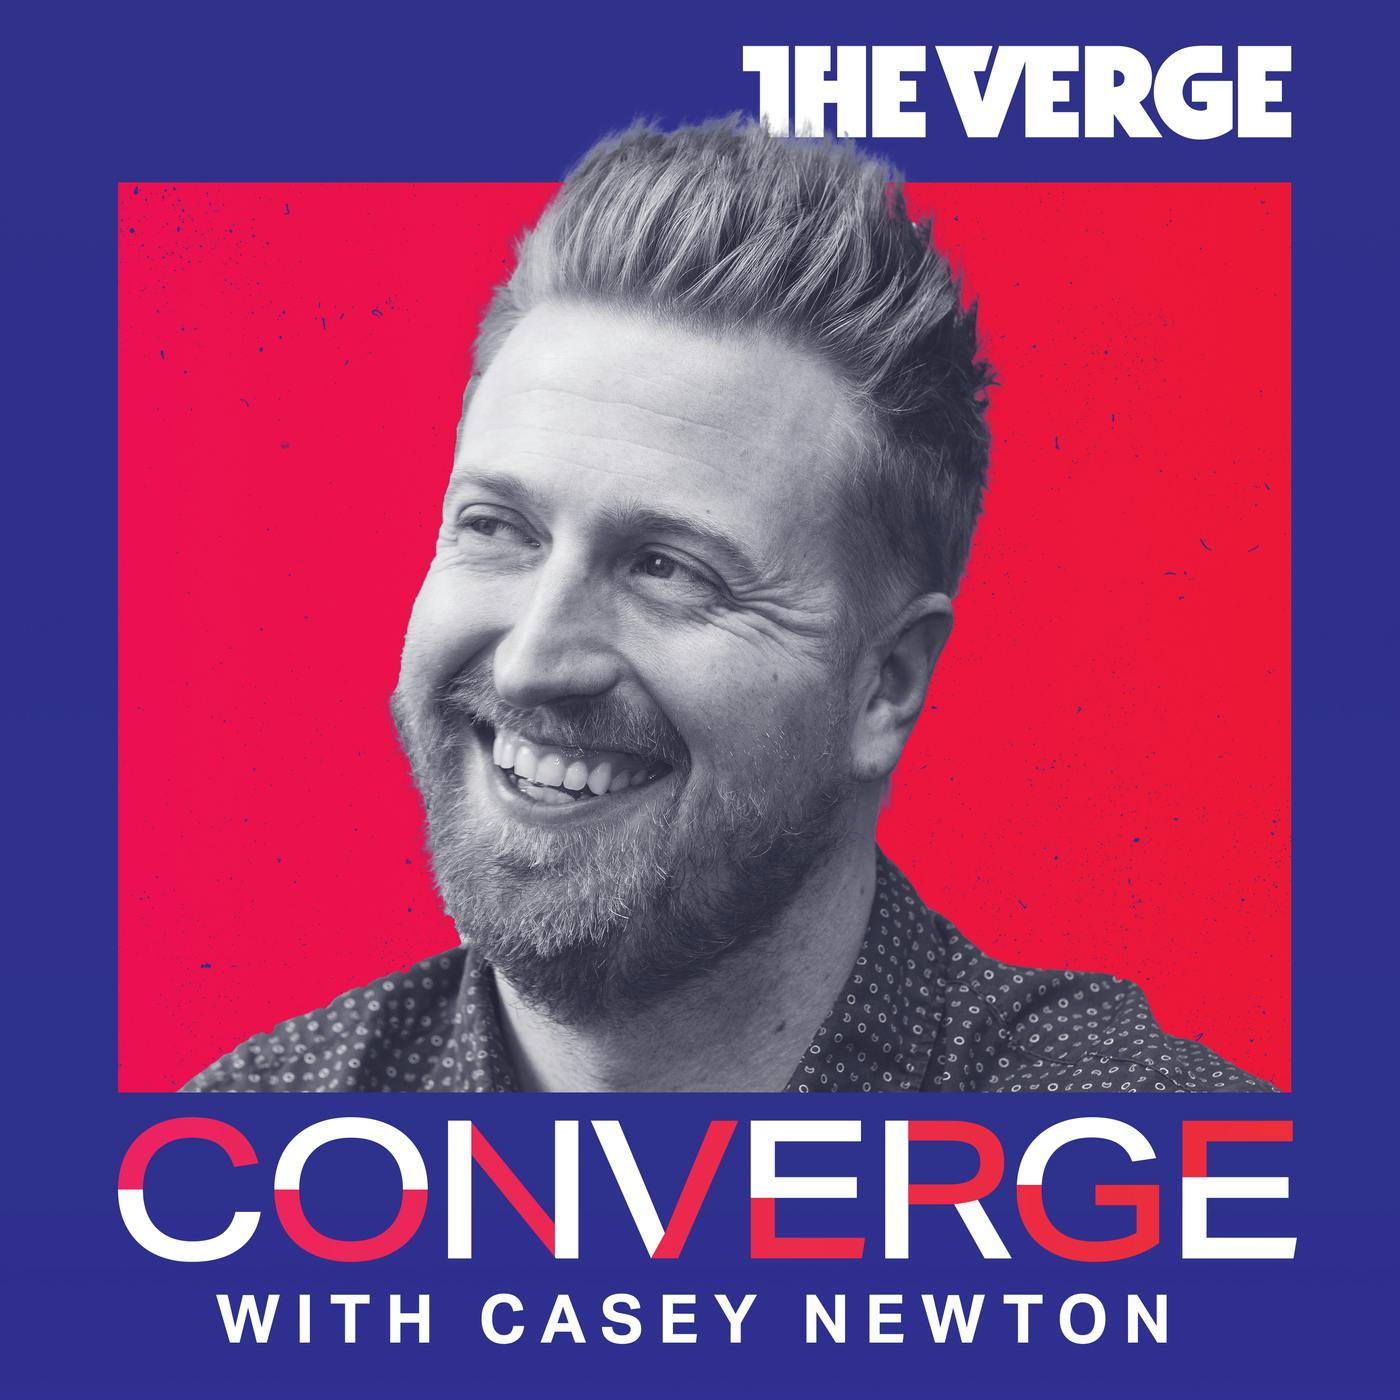 Introducing Converge with Casey Newton